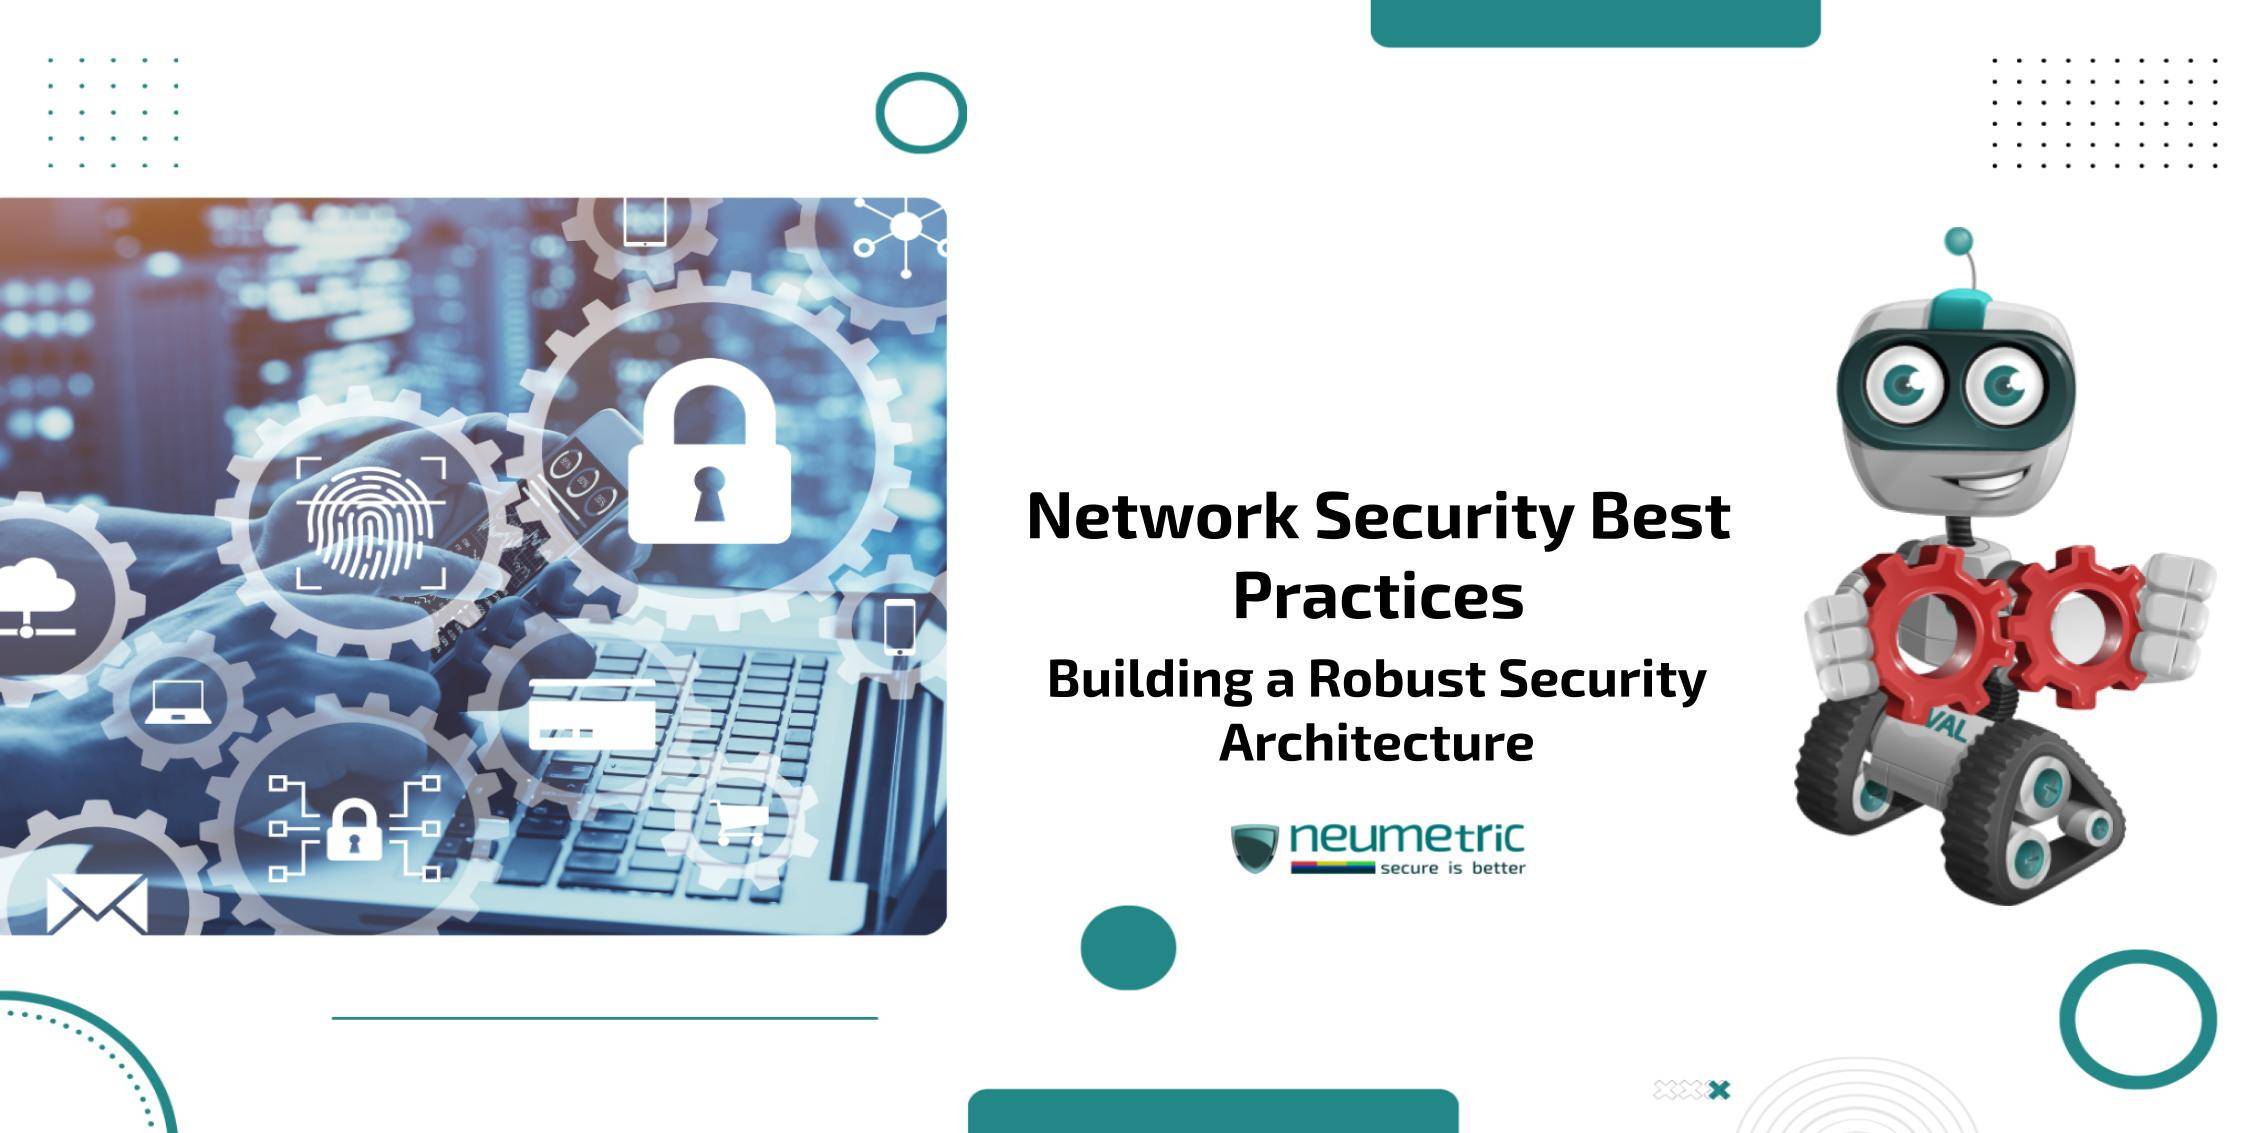 Network Security Best Practices: Building a Robust Security Architecture